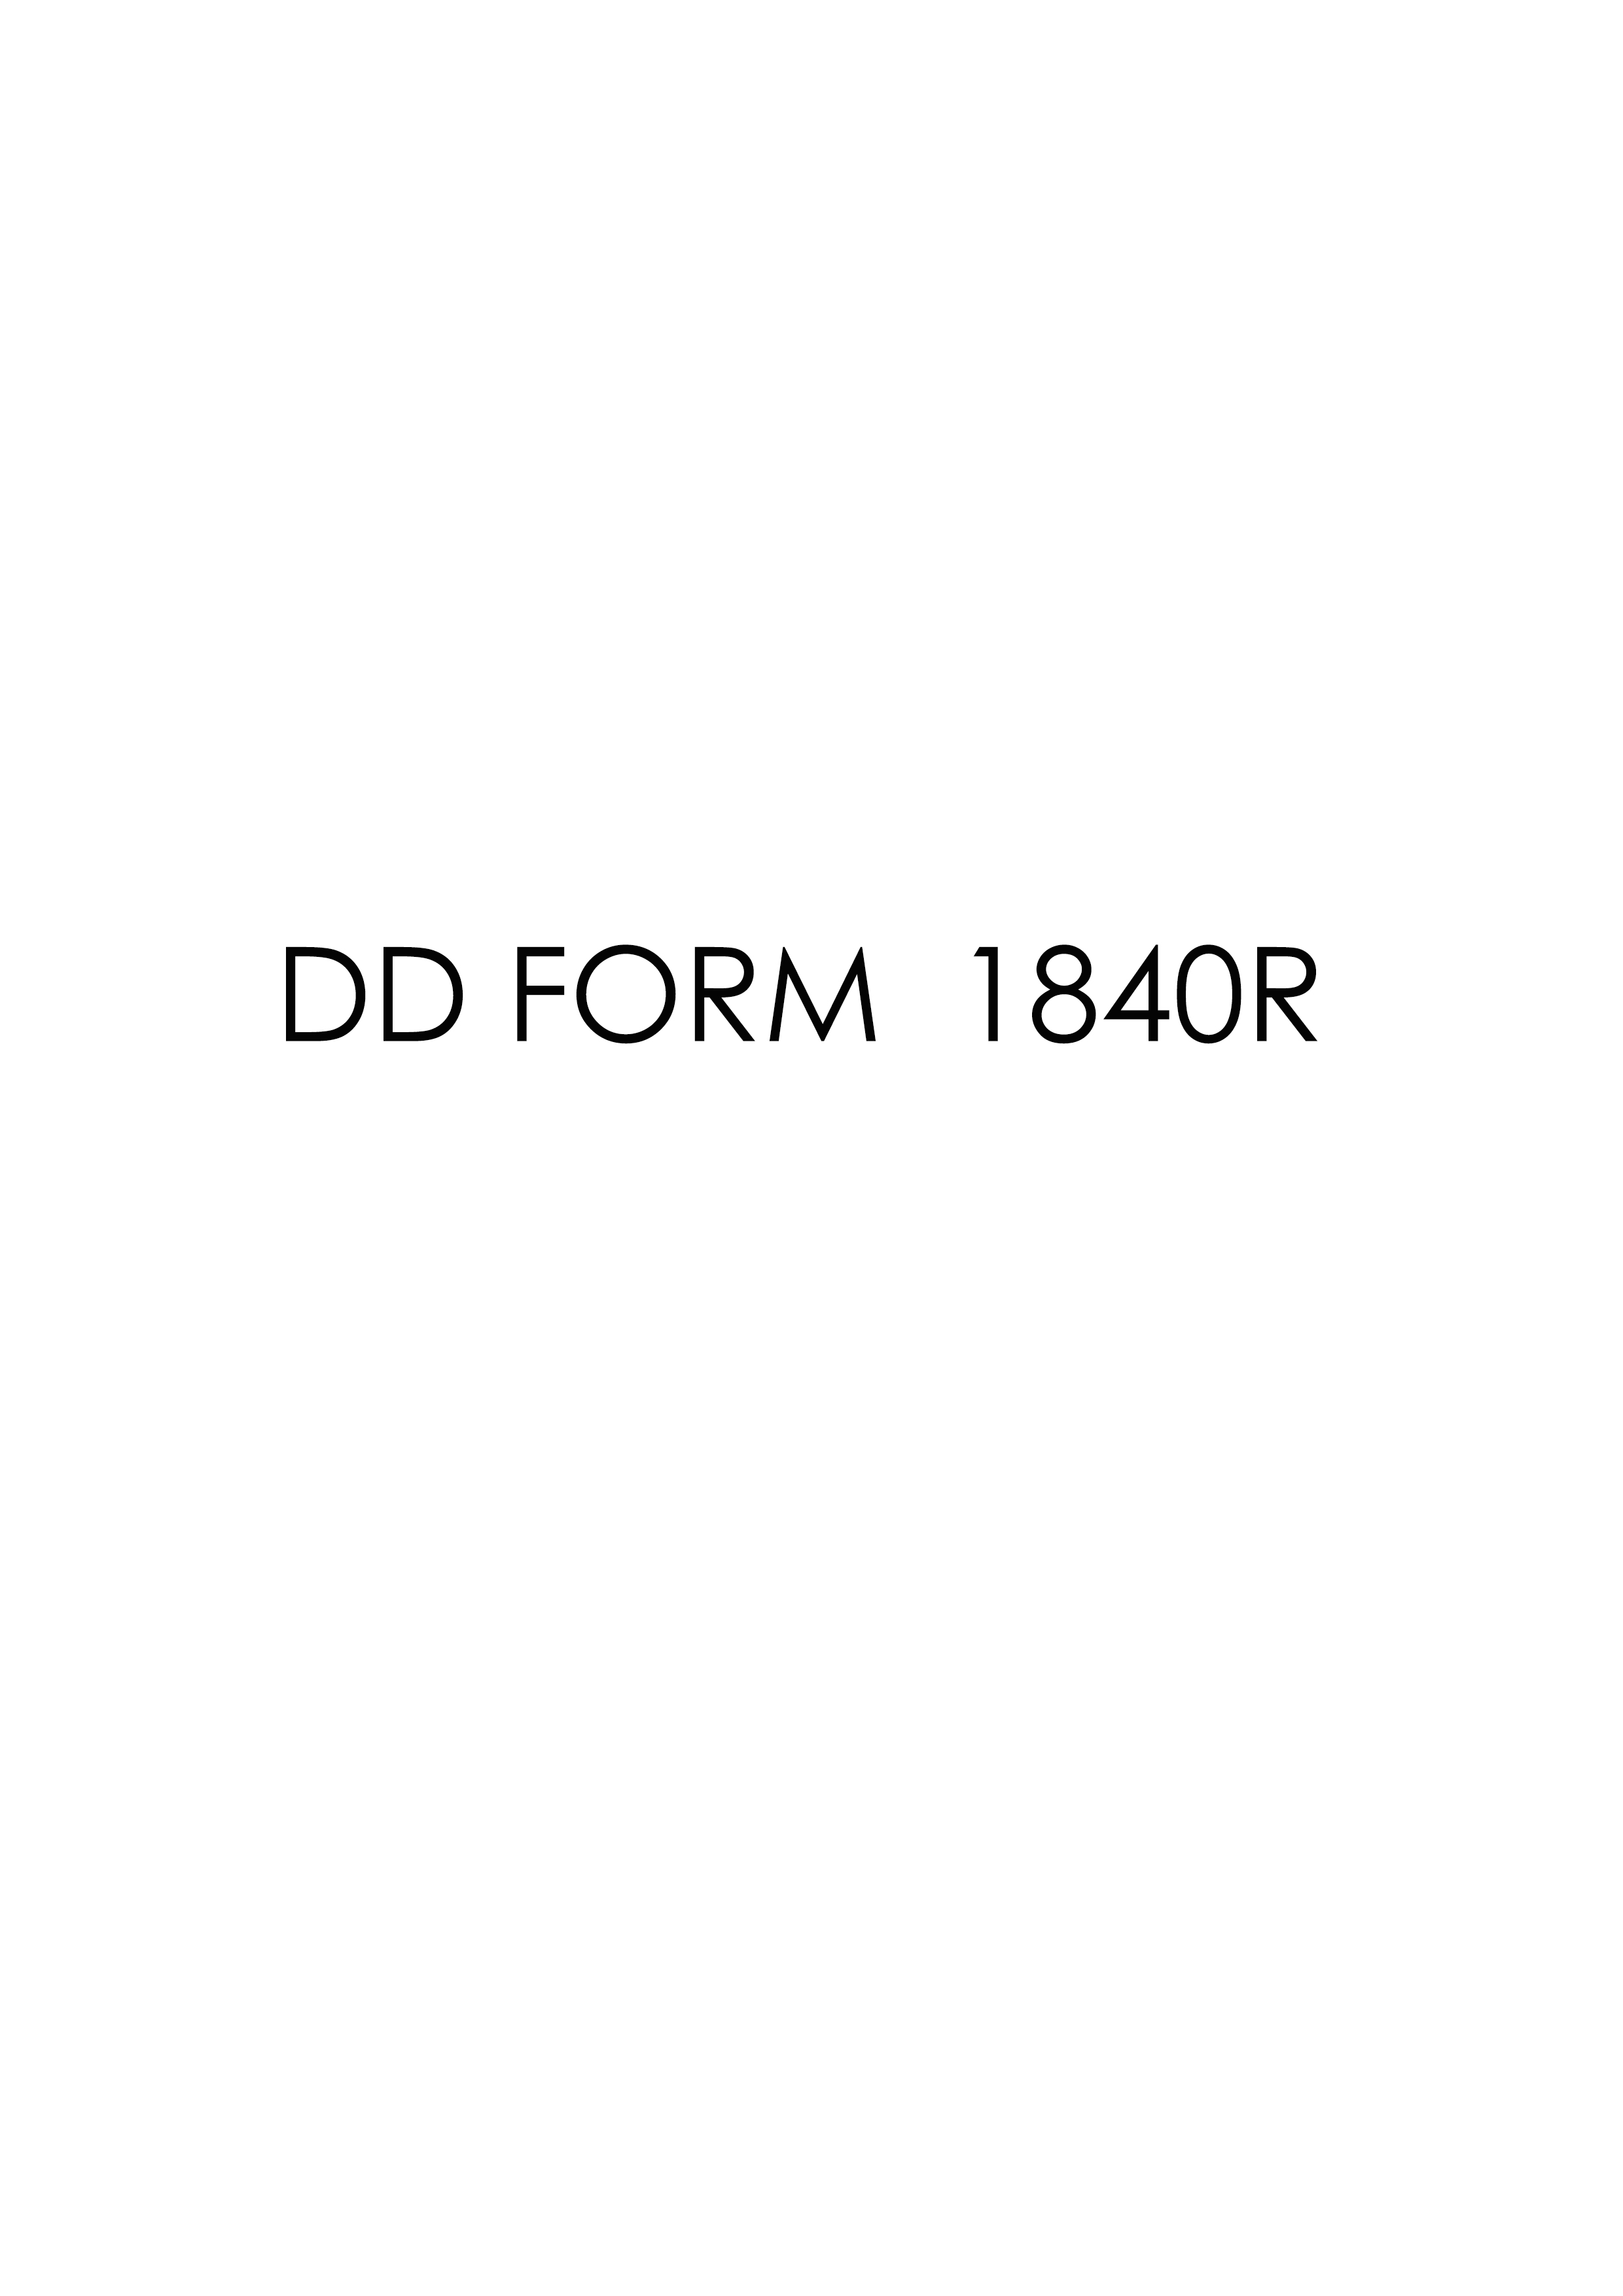 download free dd 1840R form in many formats from our site: dd 1840R fillabl...